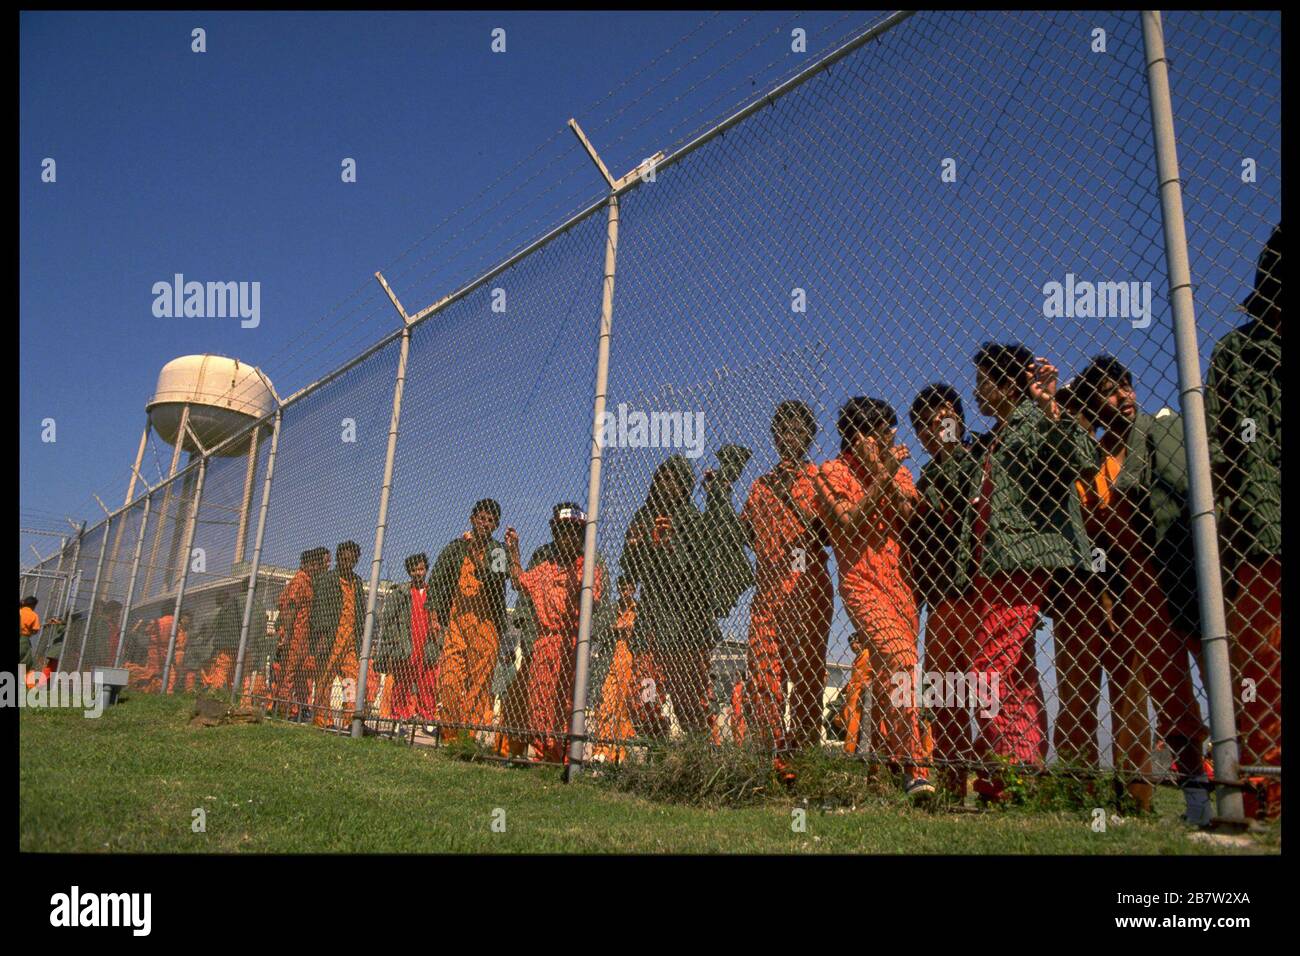 Dozens of detainees, caught by immigration officials crossing from Mexico into the United States illegally, crowd against fence at Immigration and Naturalization Service lockup in South Texas.    ©Bob Daemmrich Stock Photo